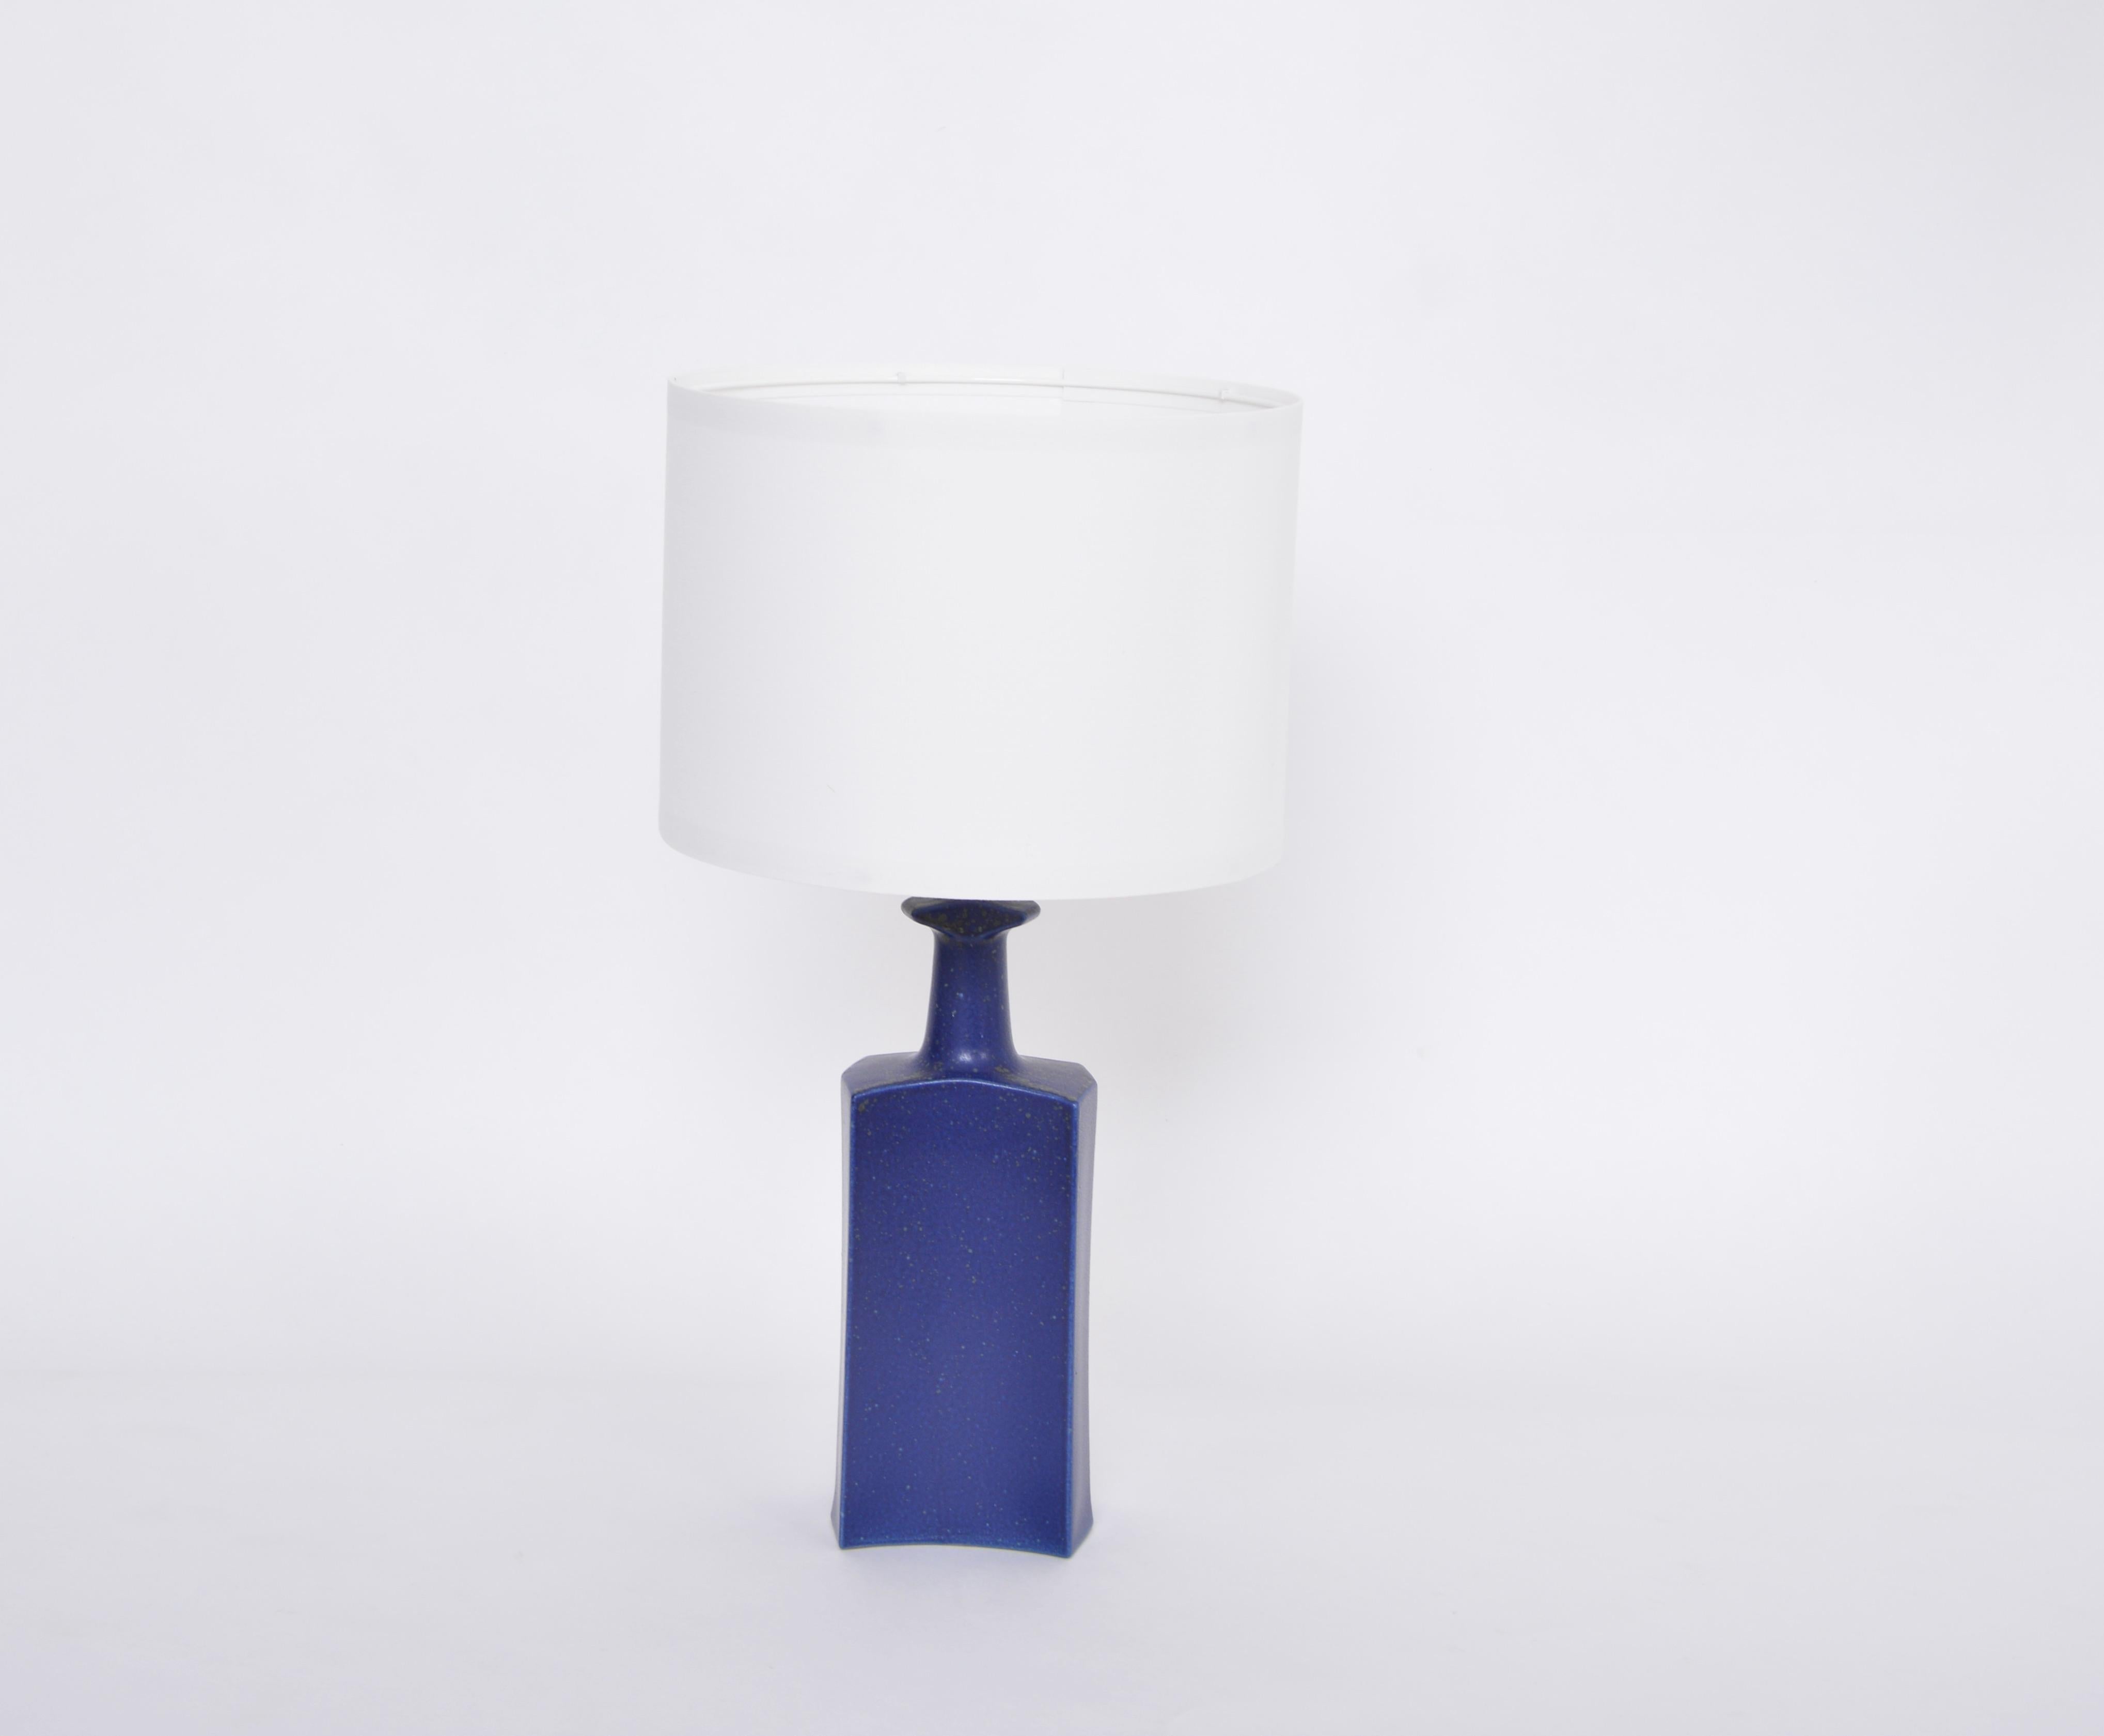 Blue Danish Mid-Century Modern Ceramic Table lamp by Atelier Knabstrup
This lamp has been designed and produced in the 1960s in Denmark by ceramic workshop Knabstrup. This lamp is from the Knabstrup Atelier series. The design could be by Richard